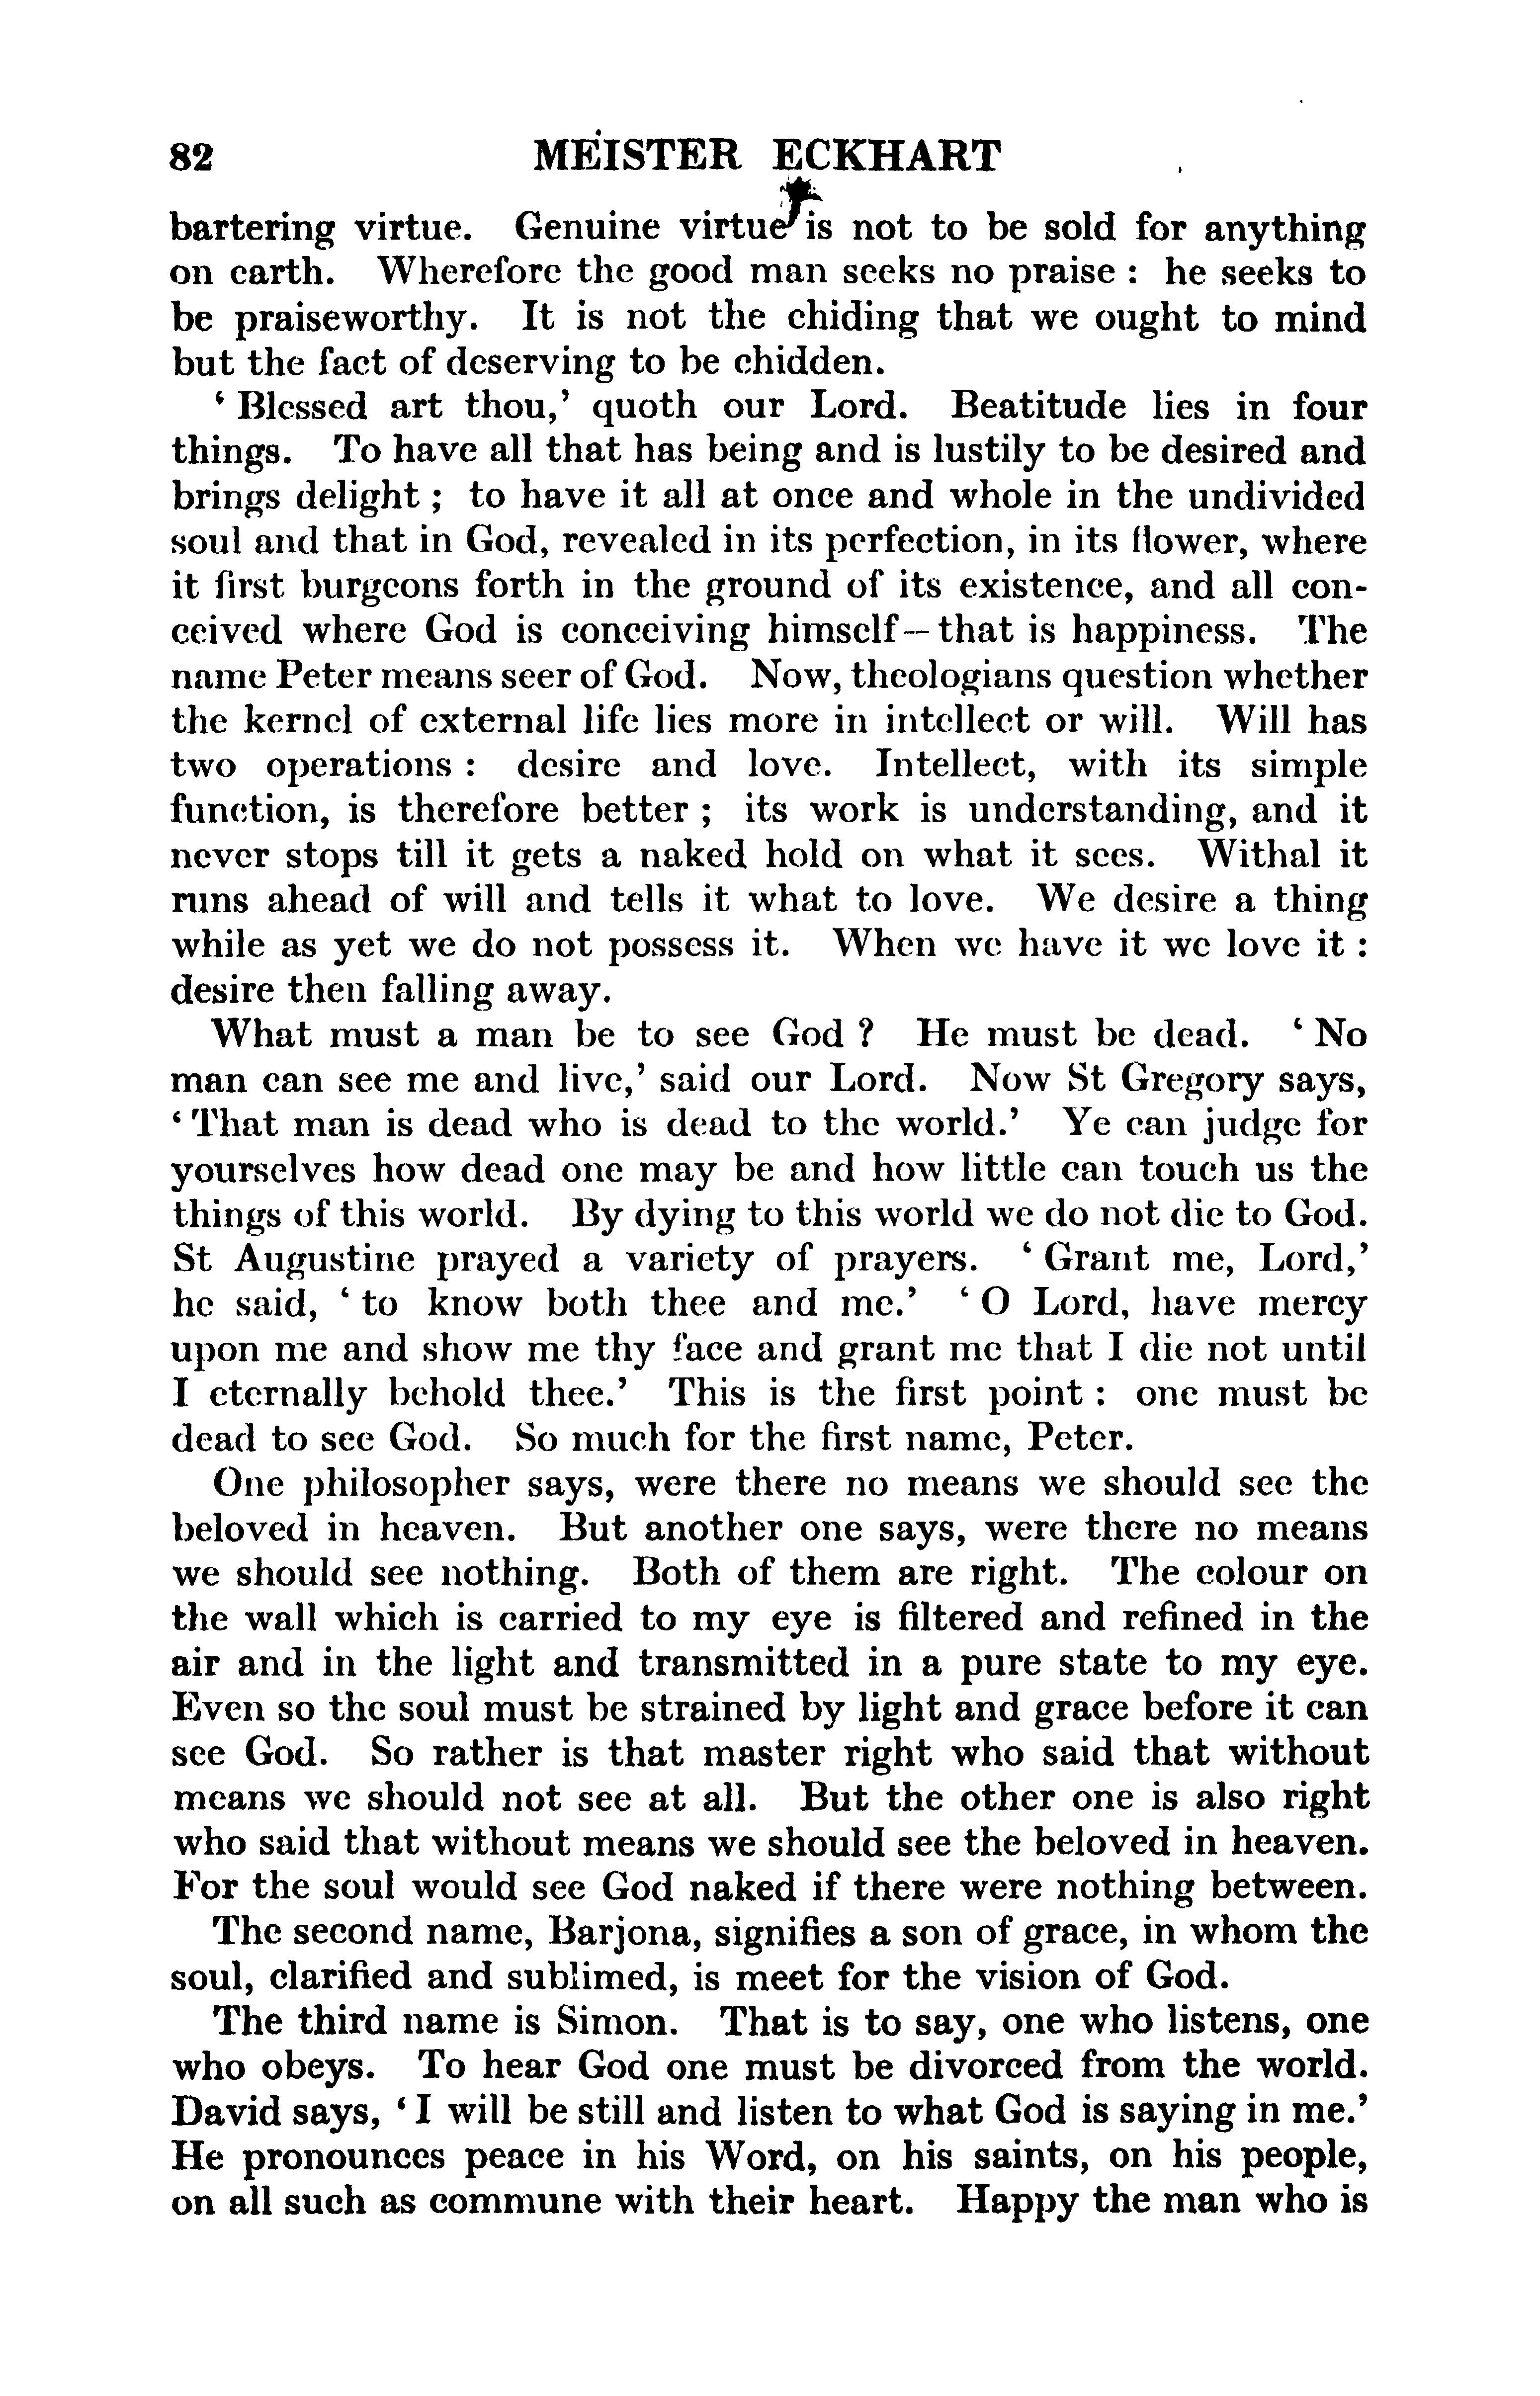 Image of page 0106